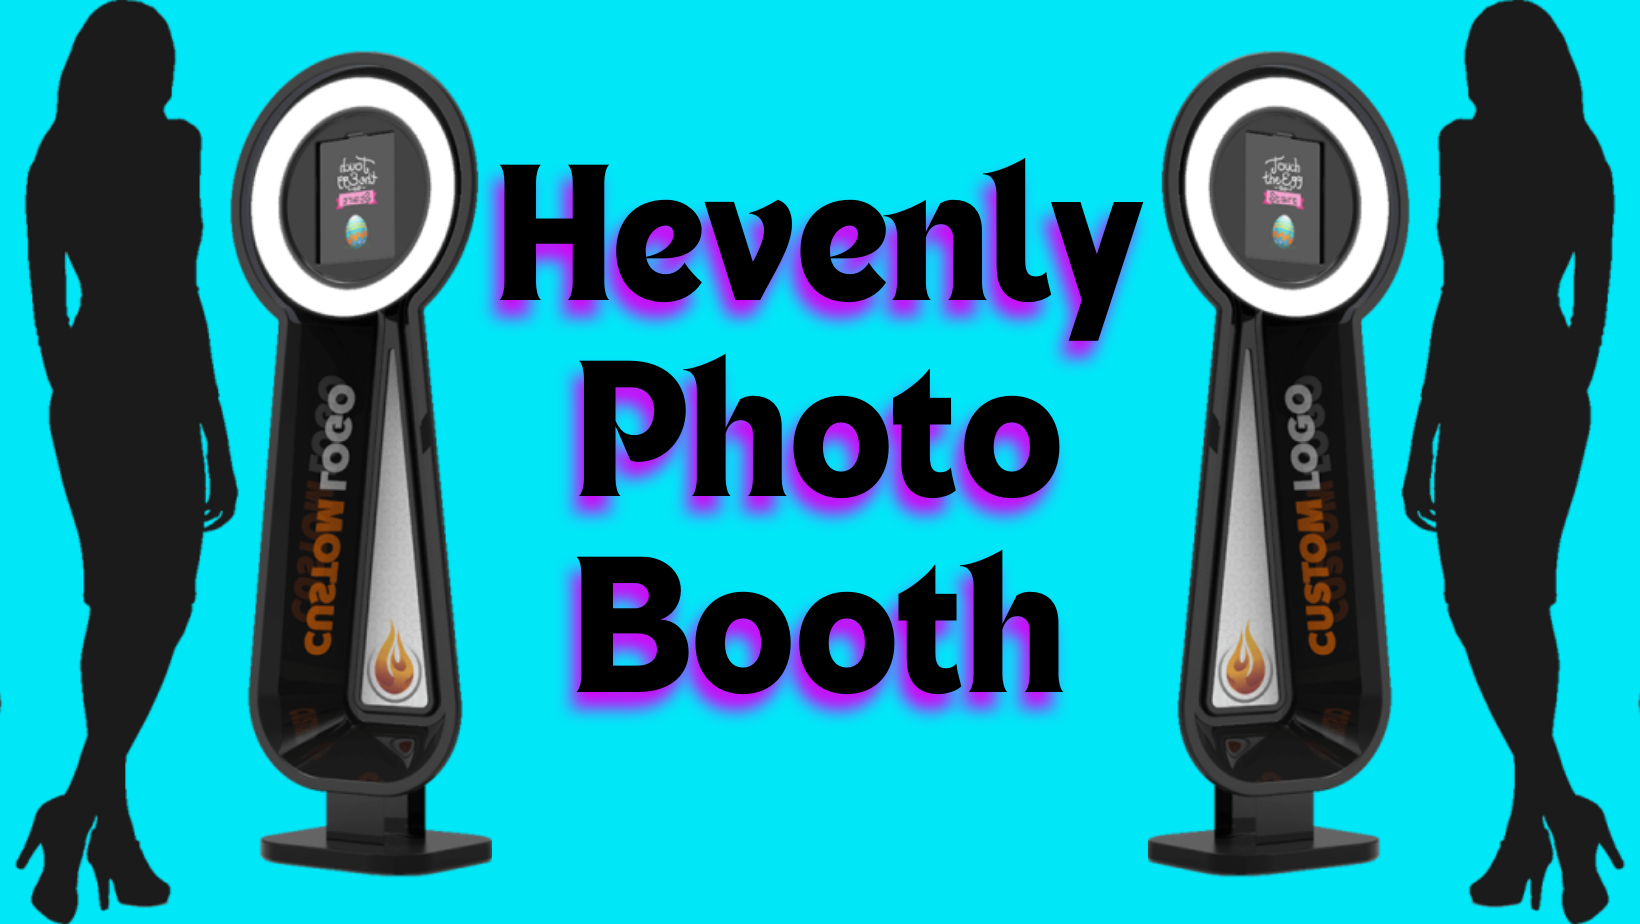 Photo Booth, Event, cooperate parties, Party ideas, Office Parties, Event planners, wedding planners.